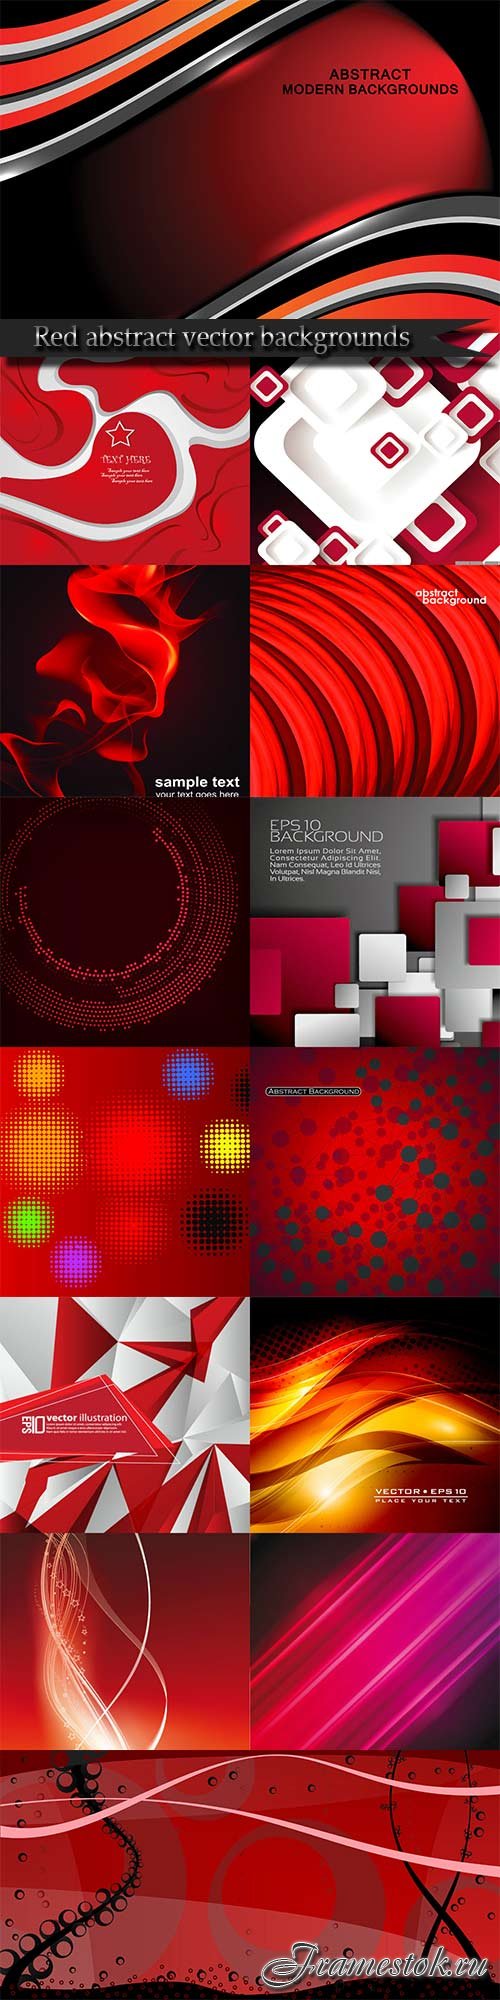 Red abstract vector backgrounds